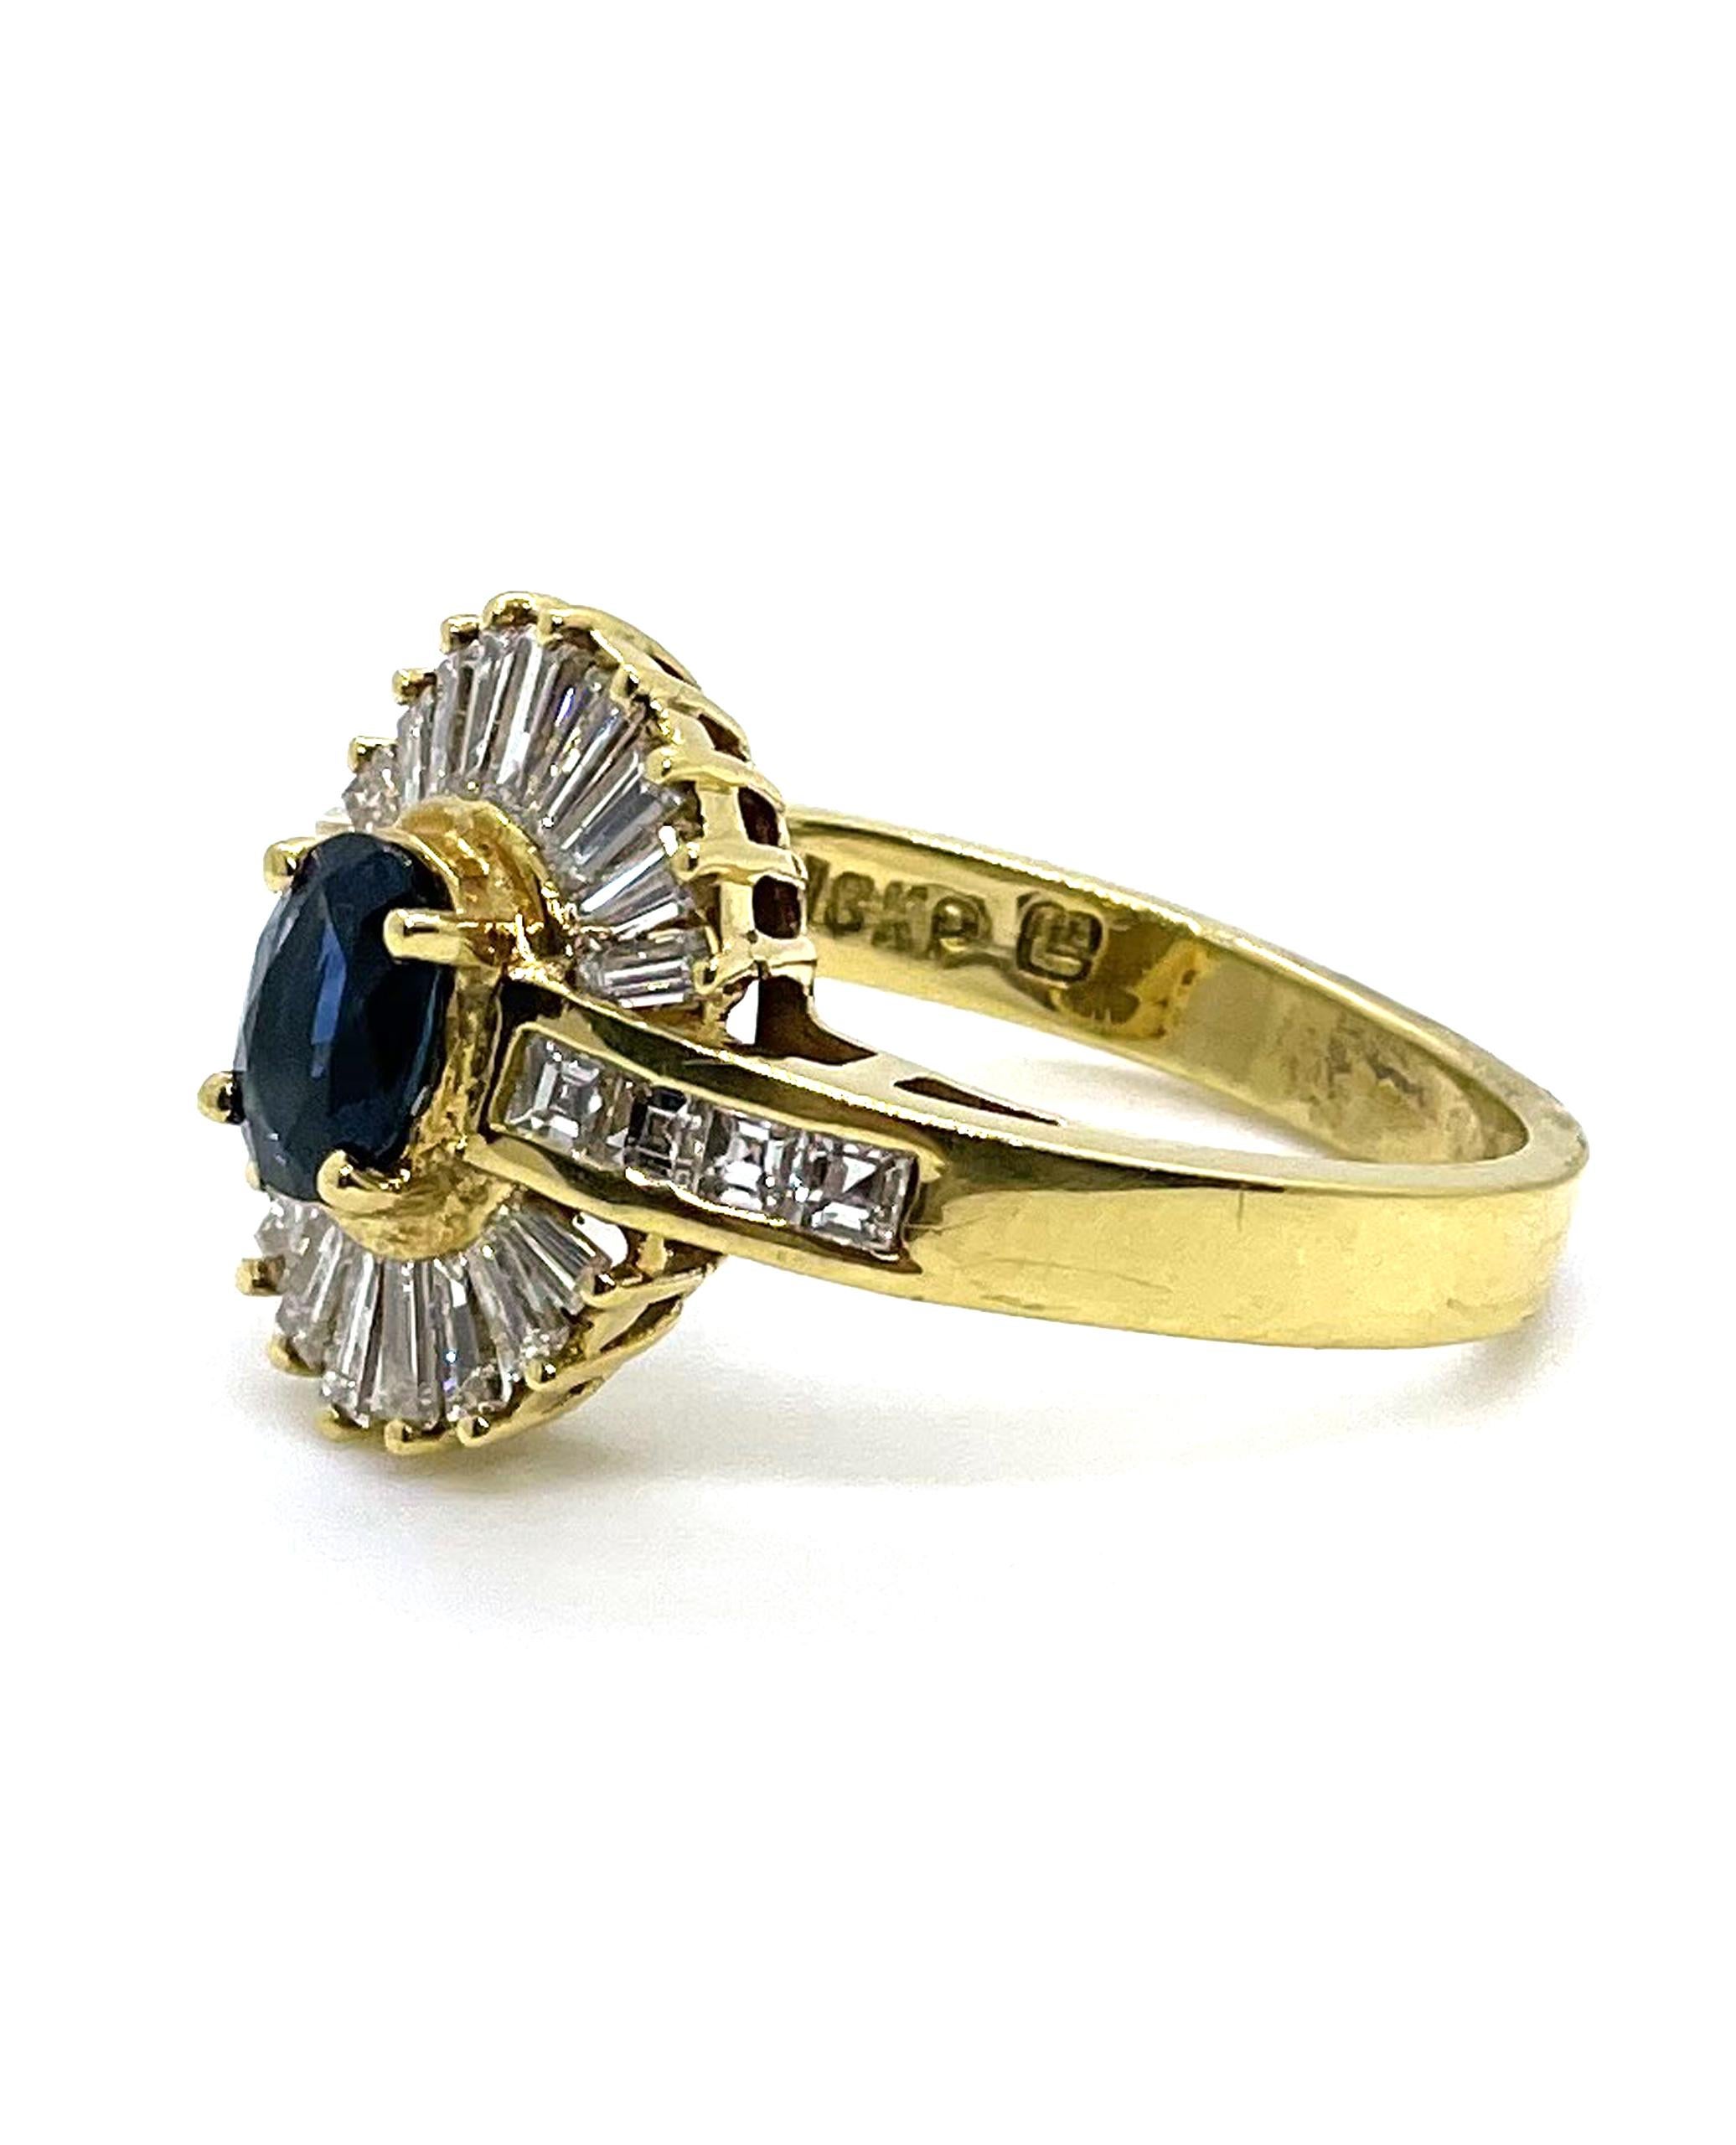 Vintage Sapphire Ring with Baguette Diamonds Set in 18k Gold, Circa 1985 In Good Condition For Sale In Old Tappan, NJ